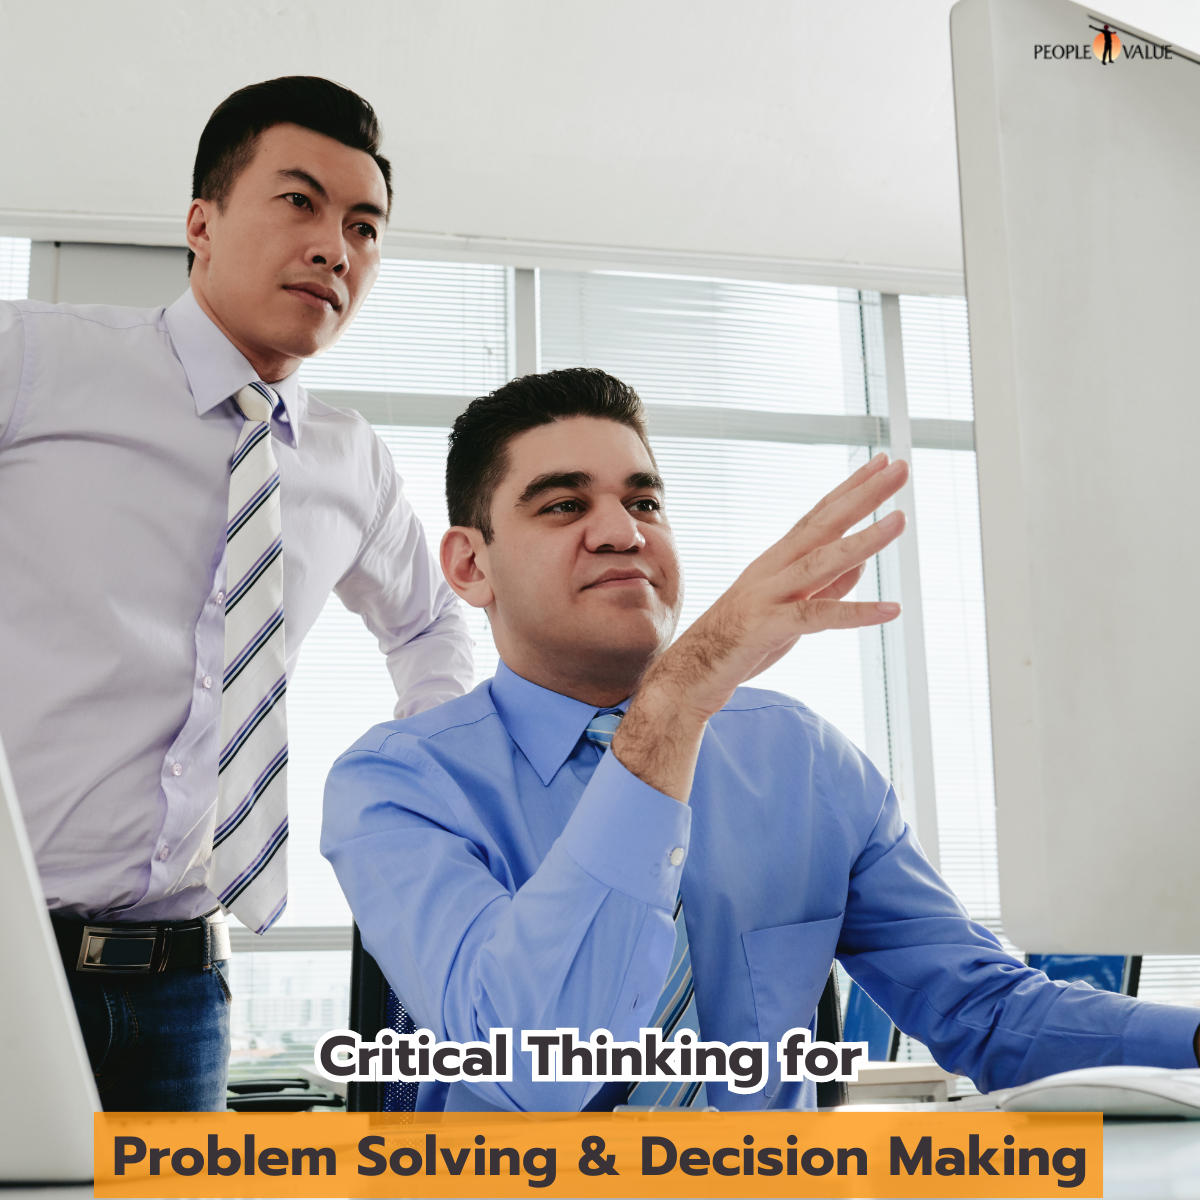 Critical Thinking for Problem Solving & Decision Making